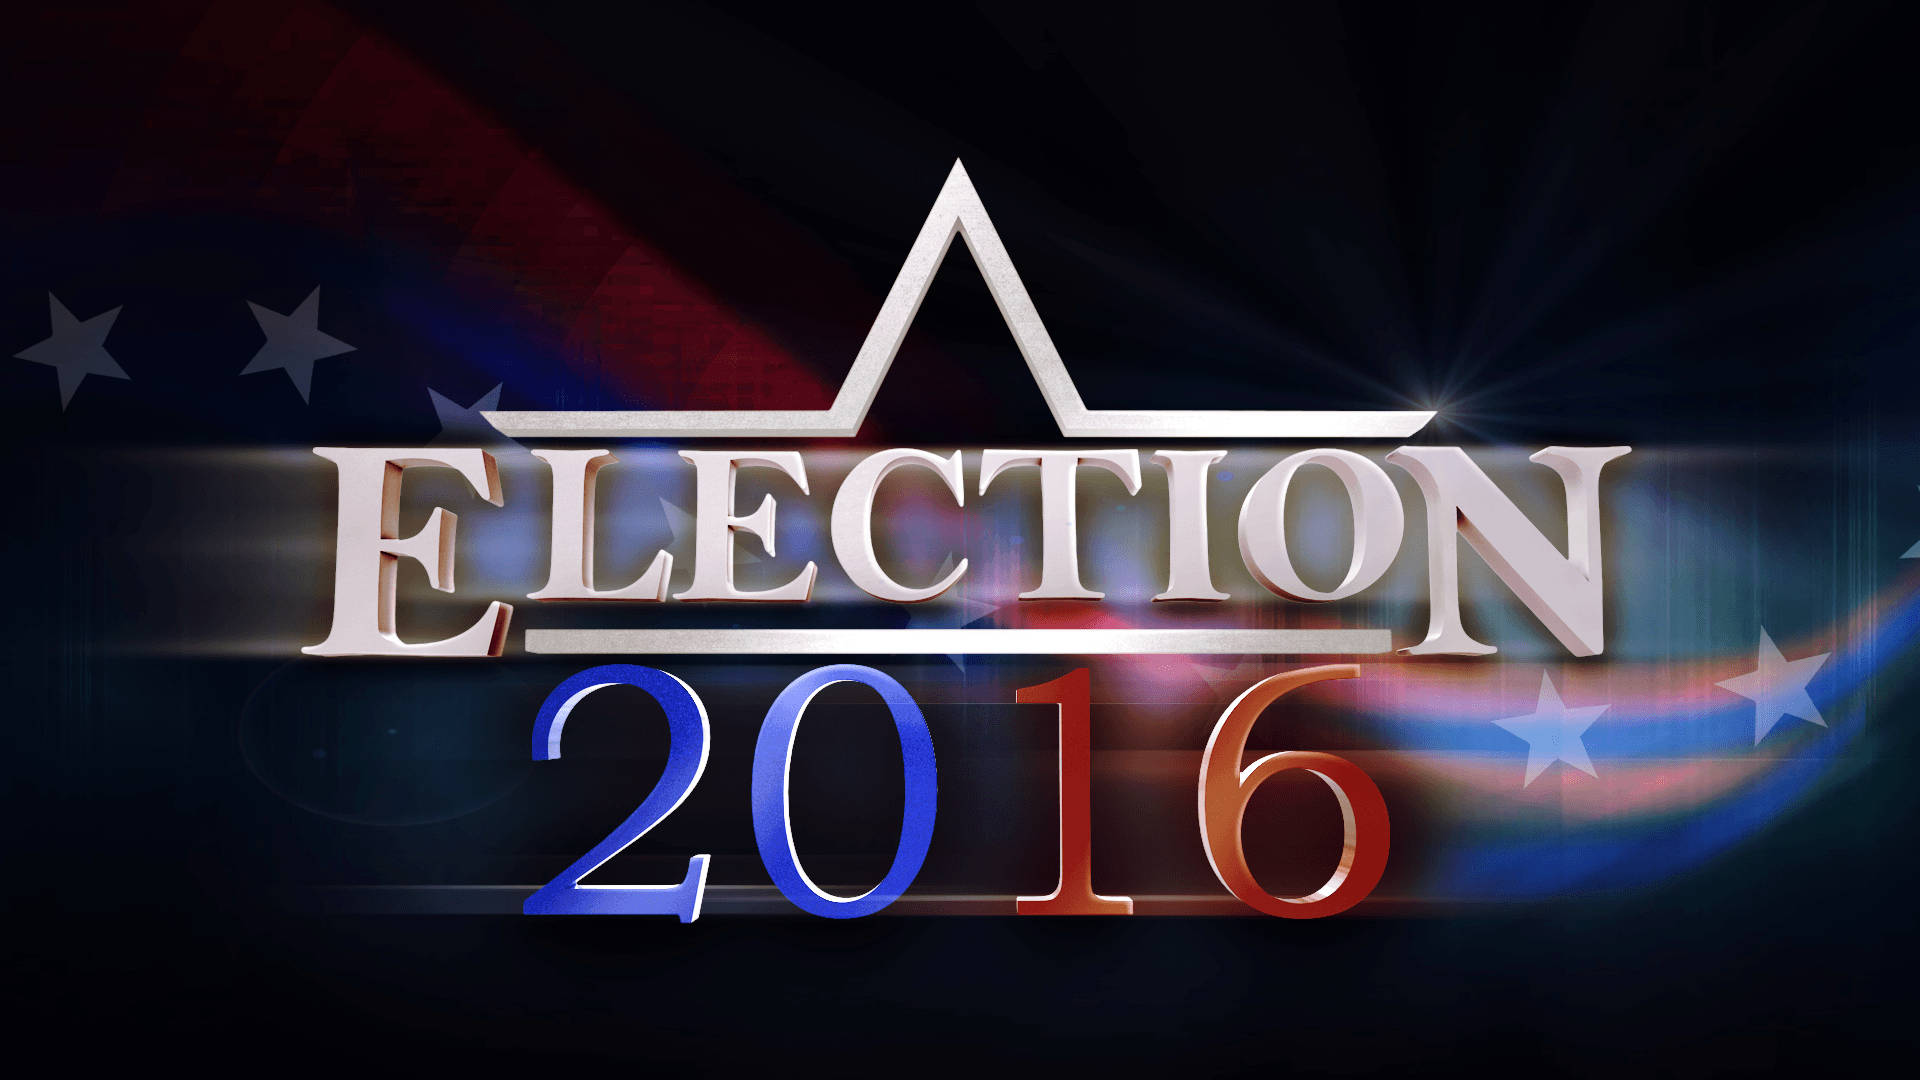 American Election 2016 Poster Wallpaper